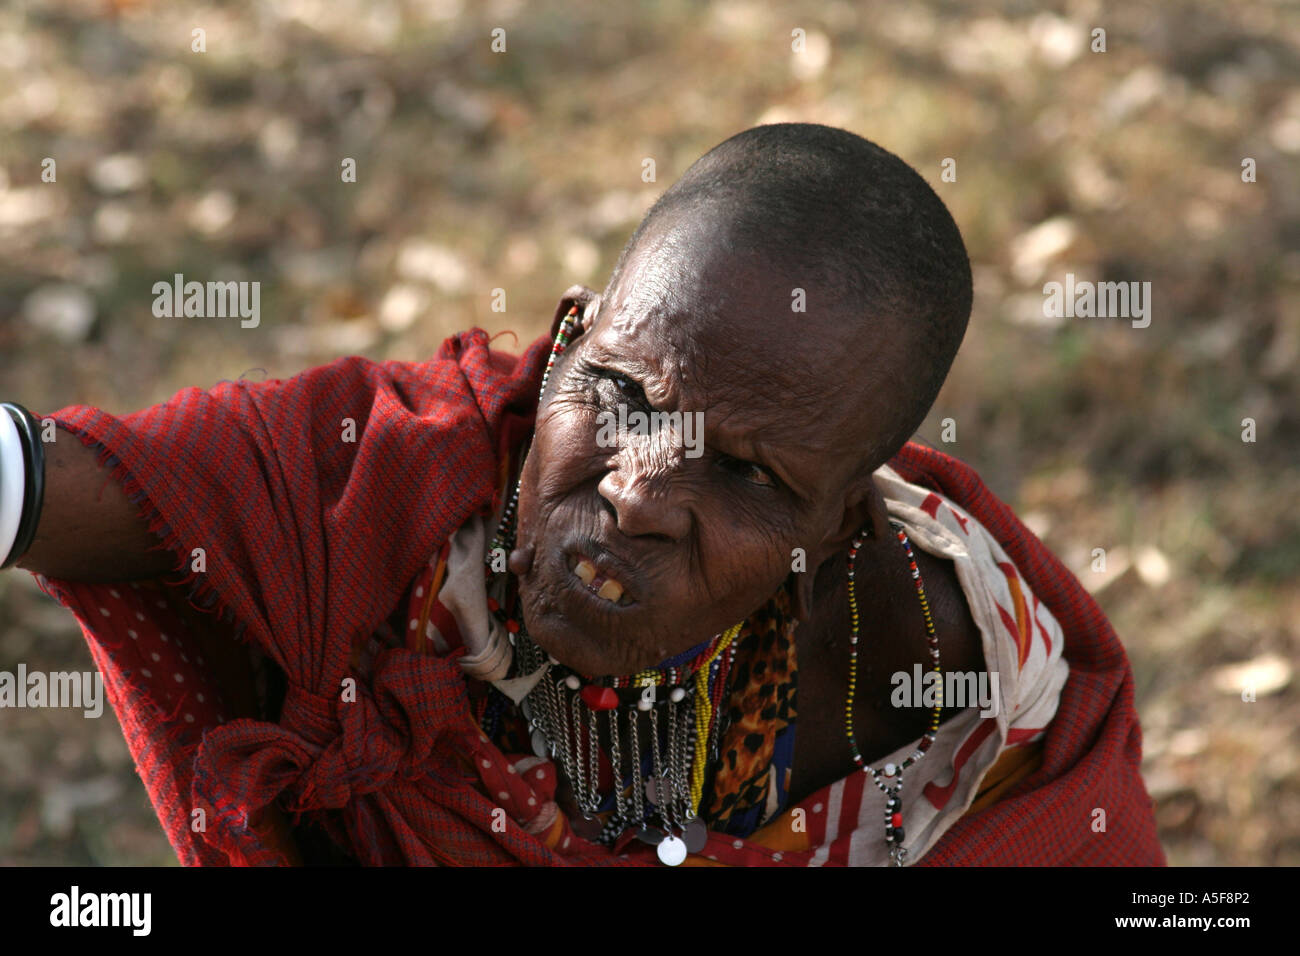 Woman from the Masai Tribe in Kenya reaching up to a safari bus, Africa Stock Photo